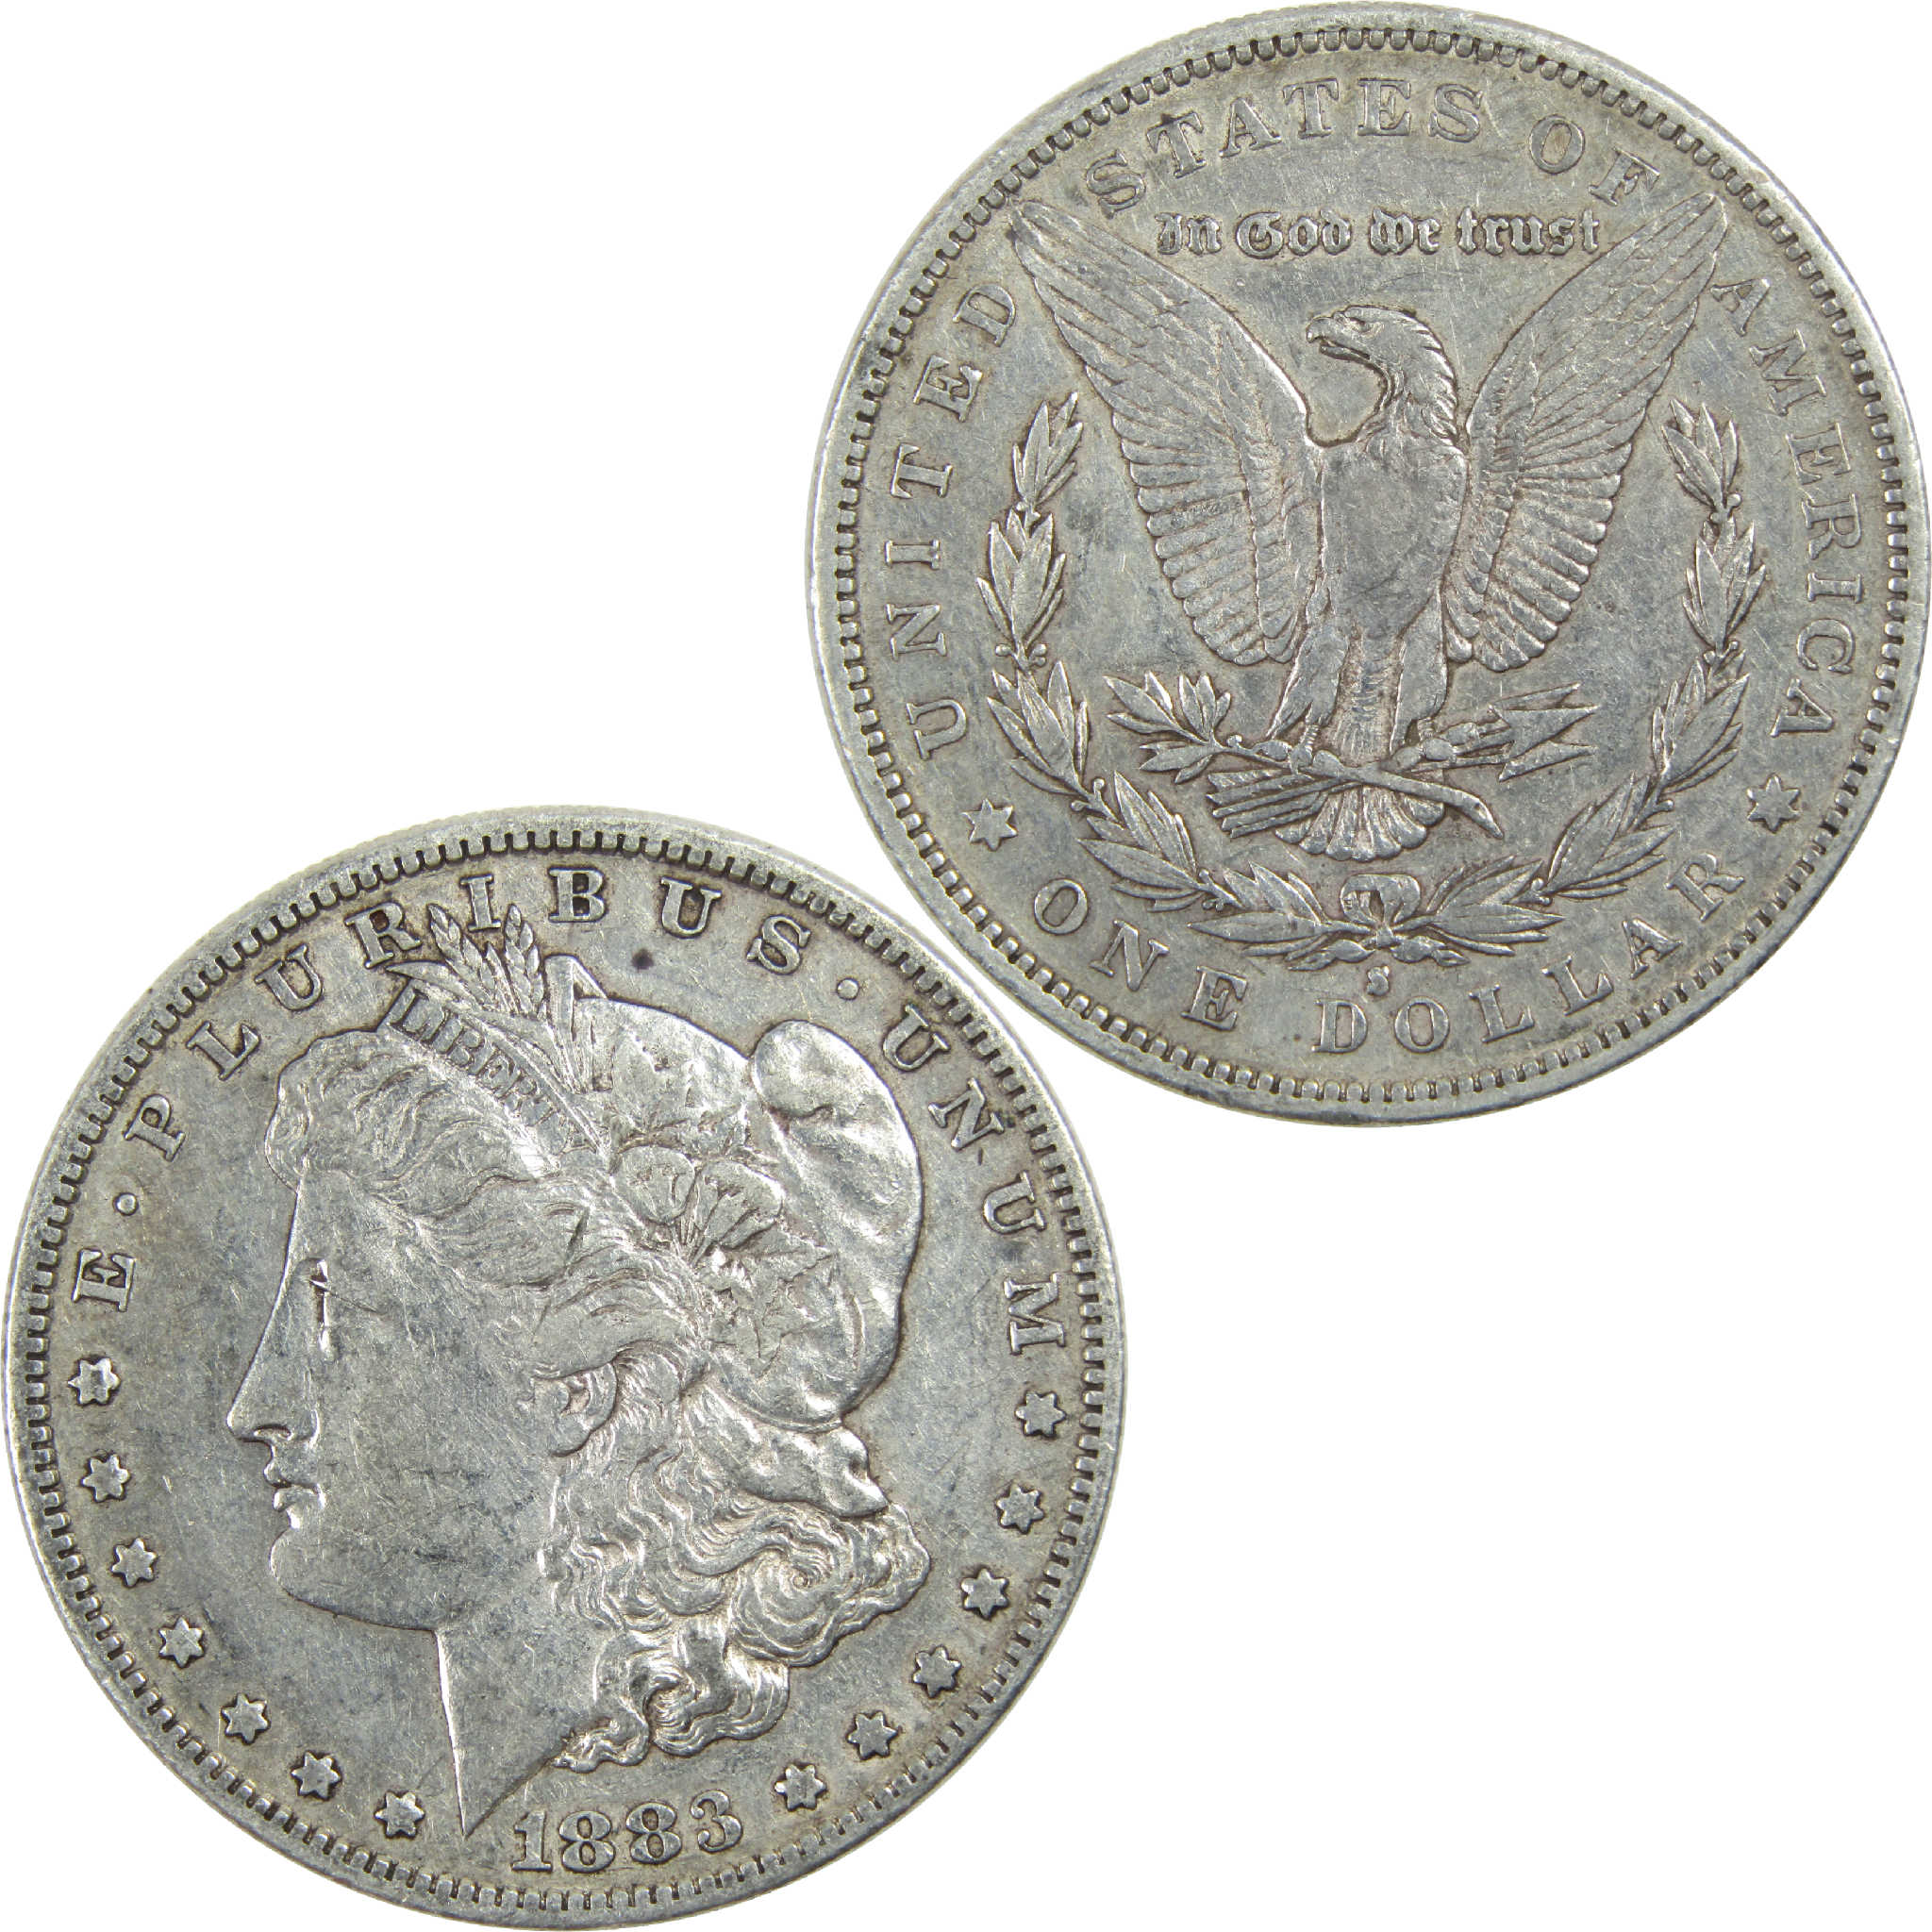 1883 S Morgan Dollar XF EF Extremely Fine Silver $1 Coin SKU:I13228 - Morgan coin - Morgan silver dollar - Morgan silver dollar for sale - Profile Coins &amp; Collectibles